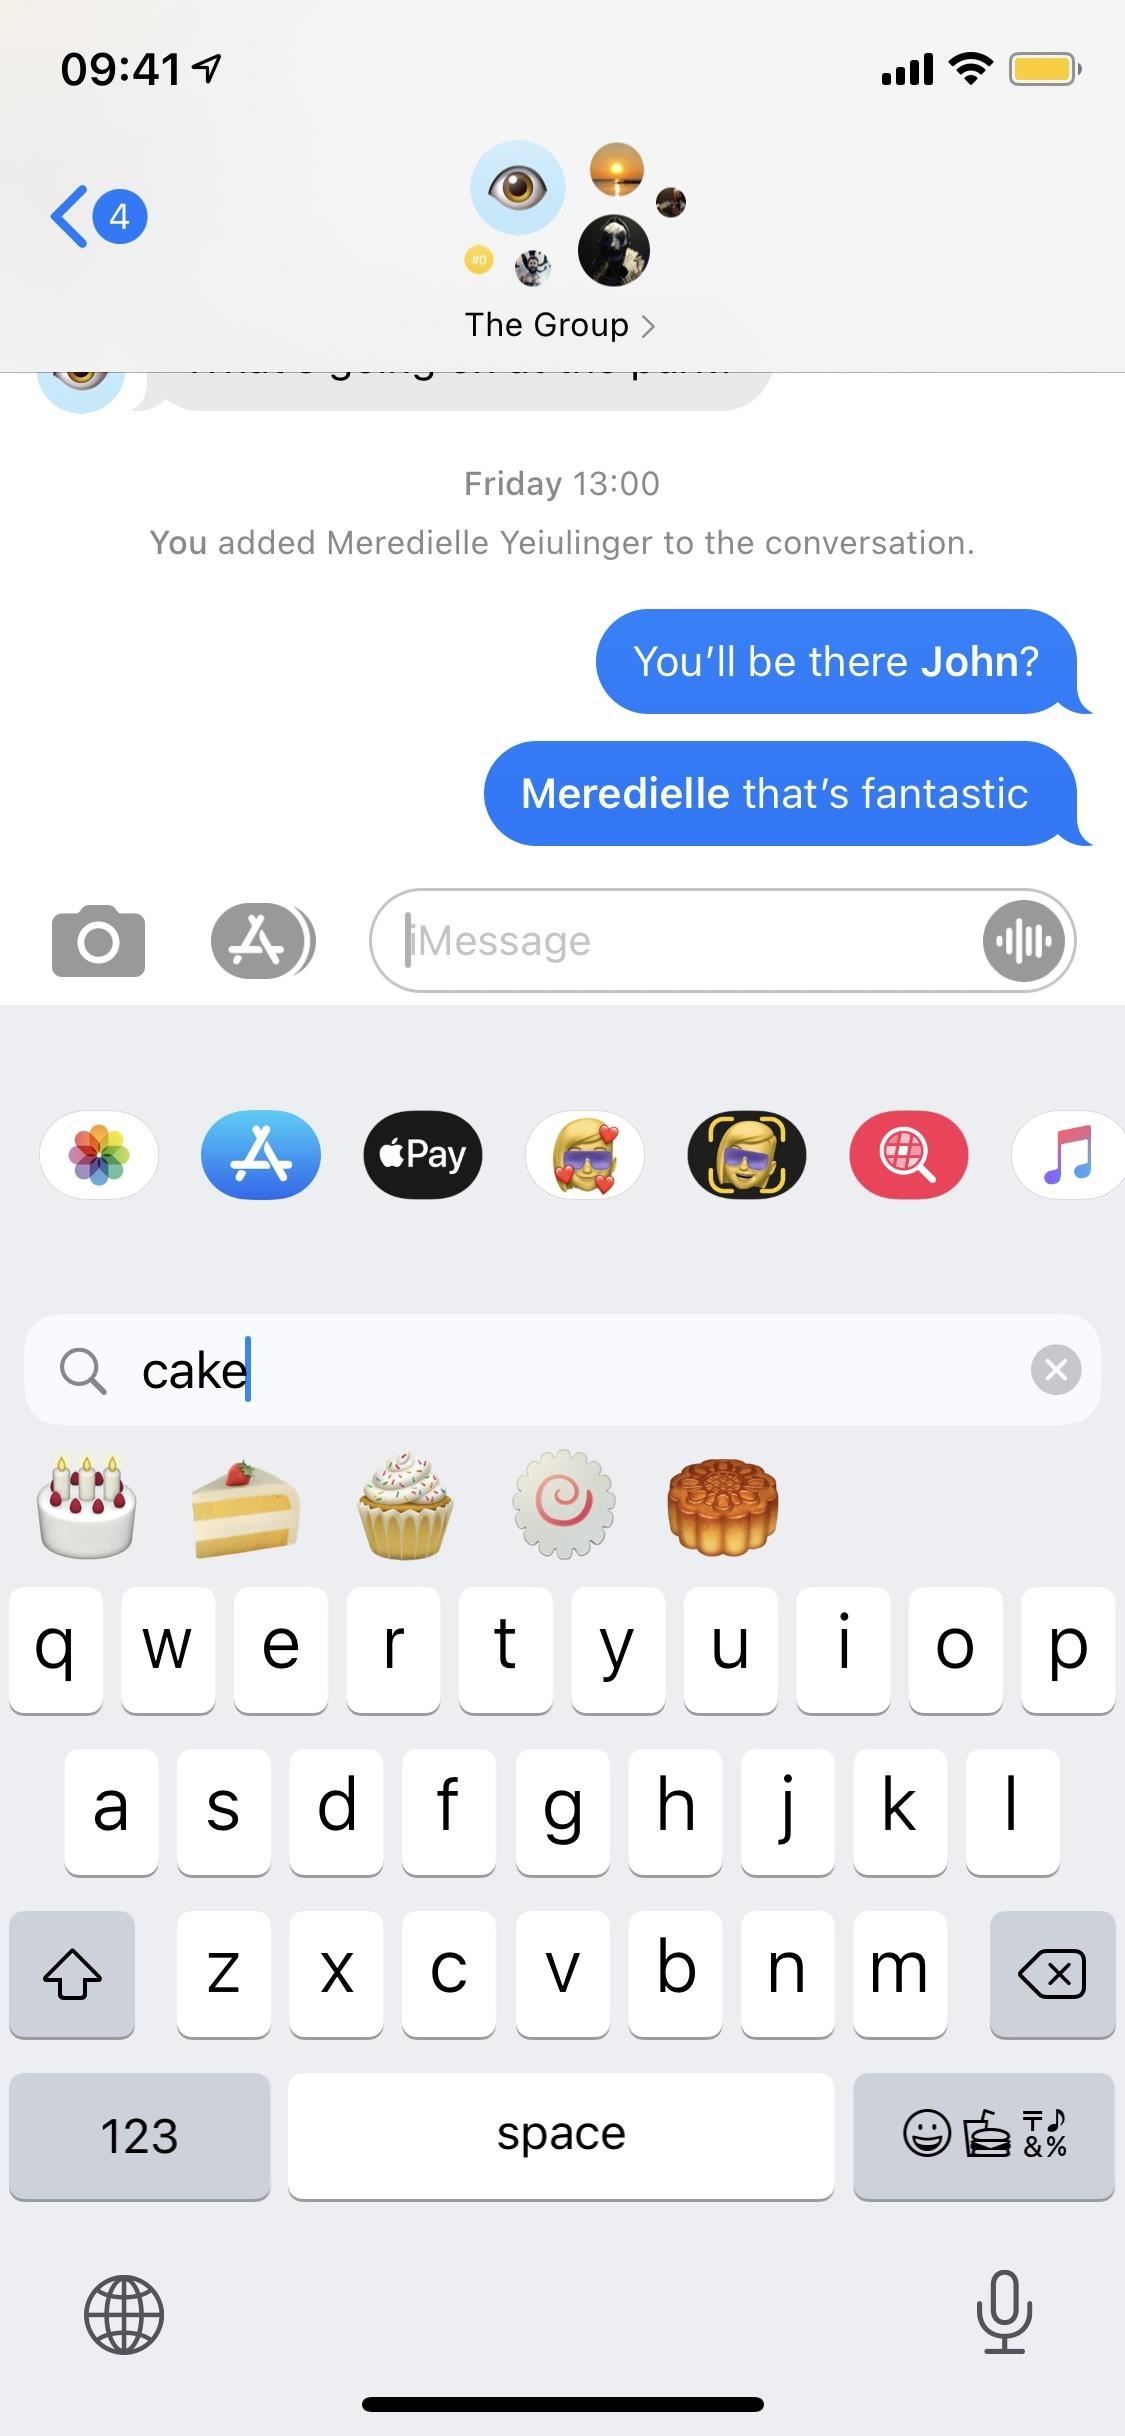 Apple's Stock Keyboard Finally Has an Emoji Search Tool — Here's How to Use It